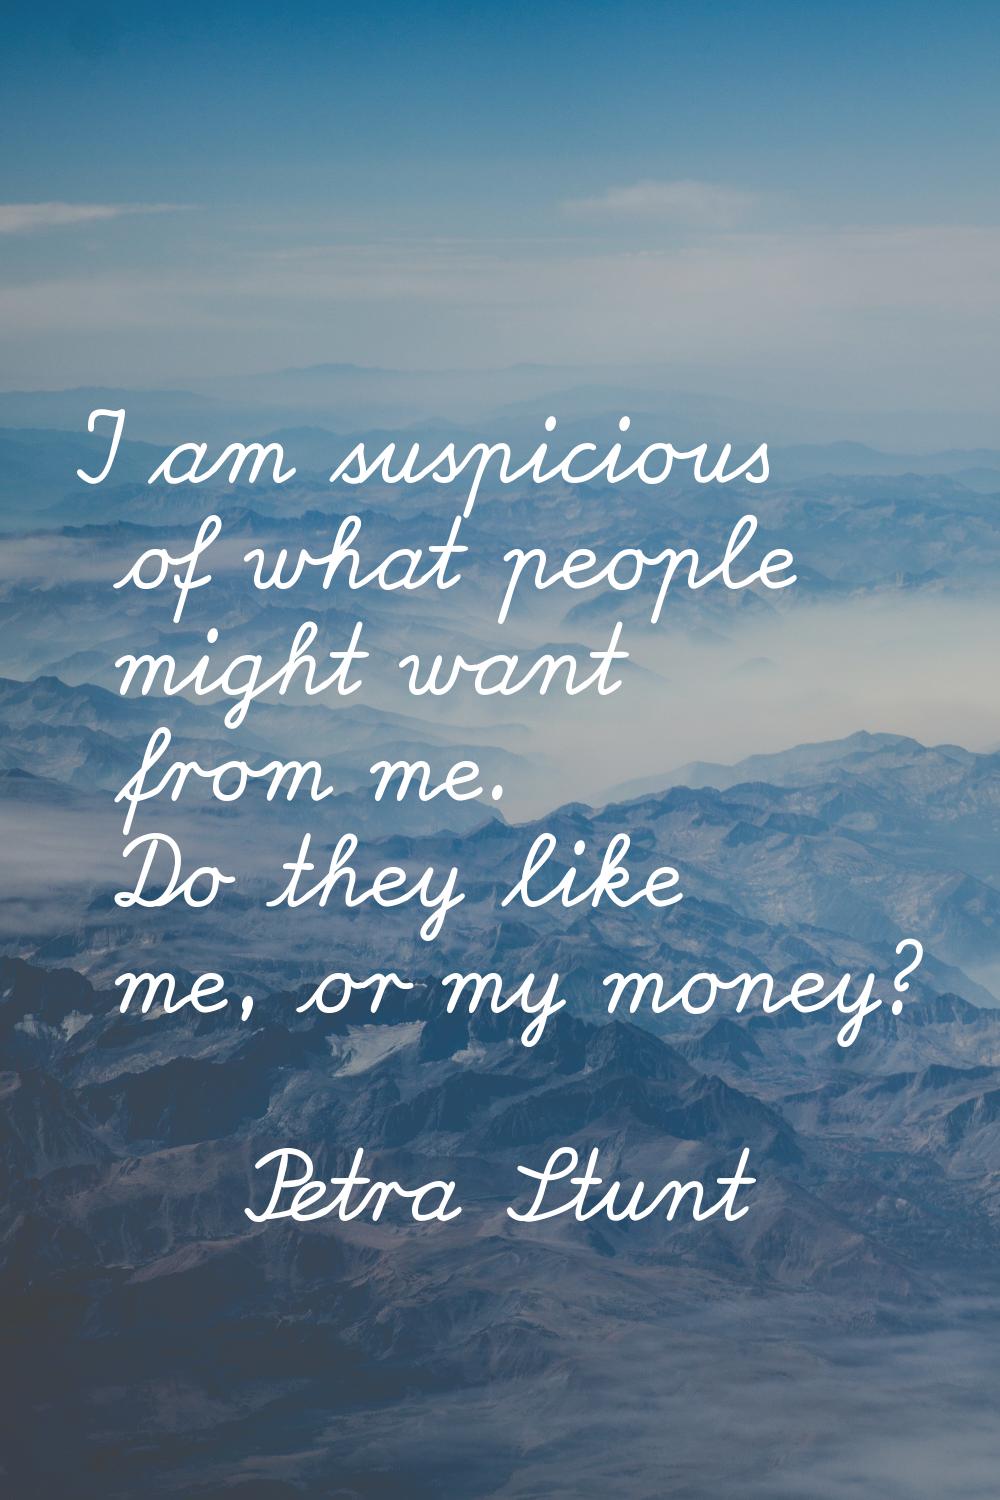 I am suspicious of what people might want from me. Do they like me, or my money?